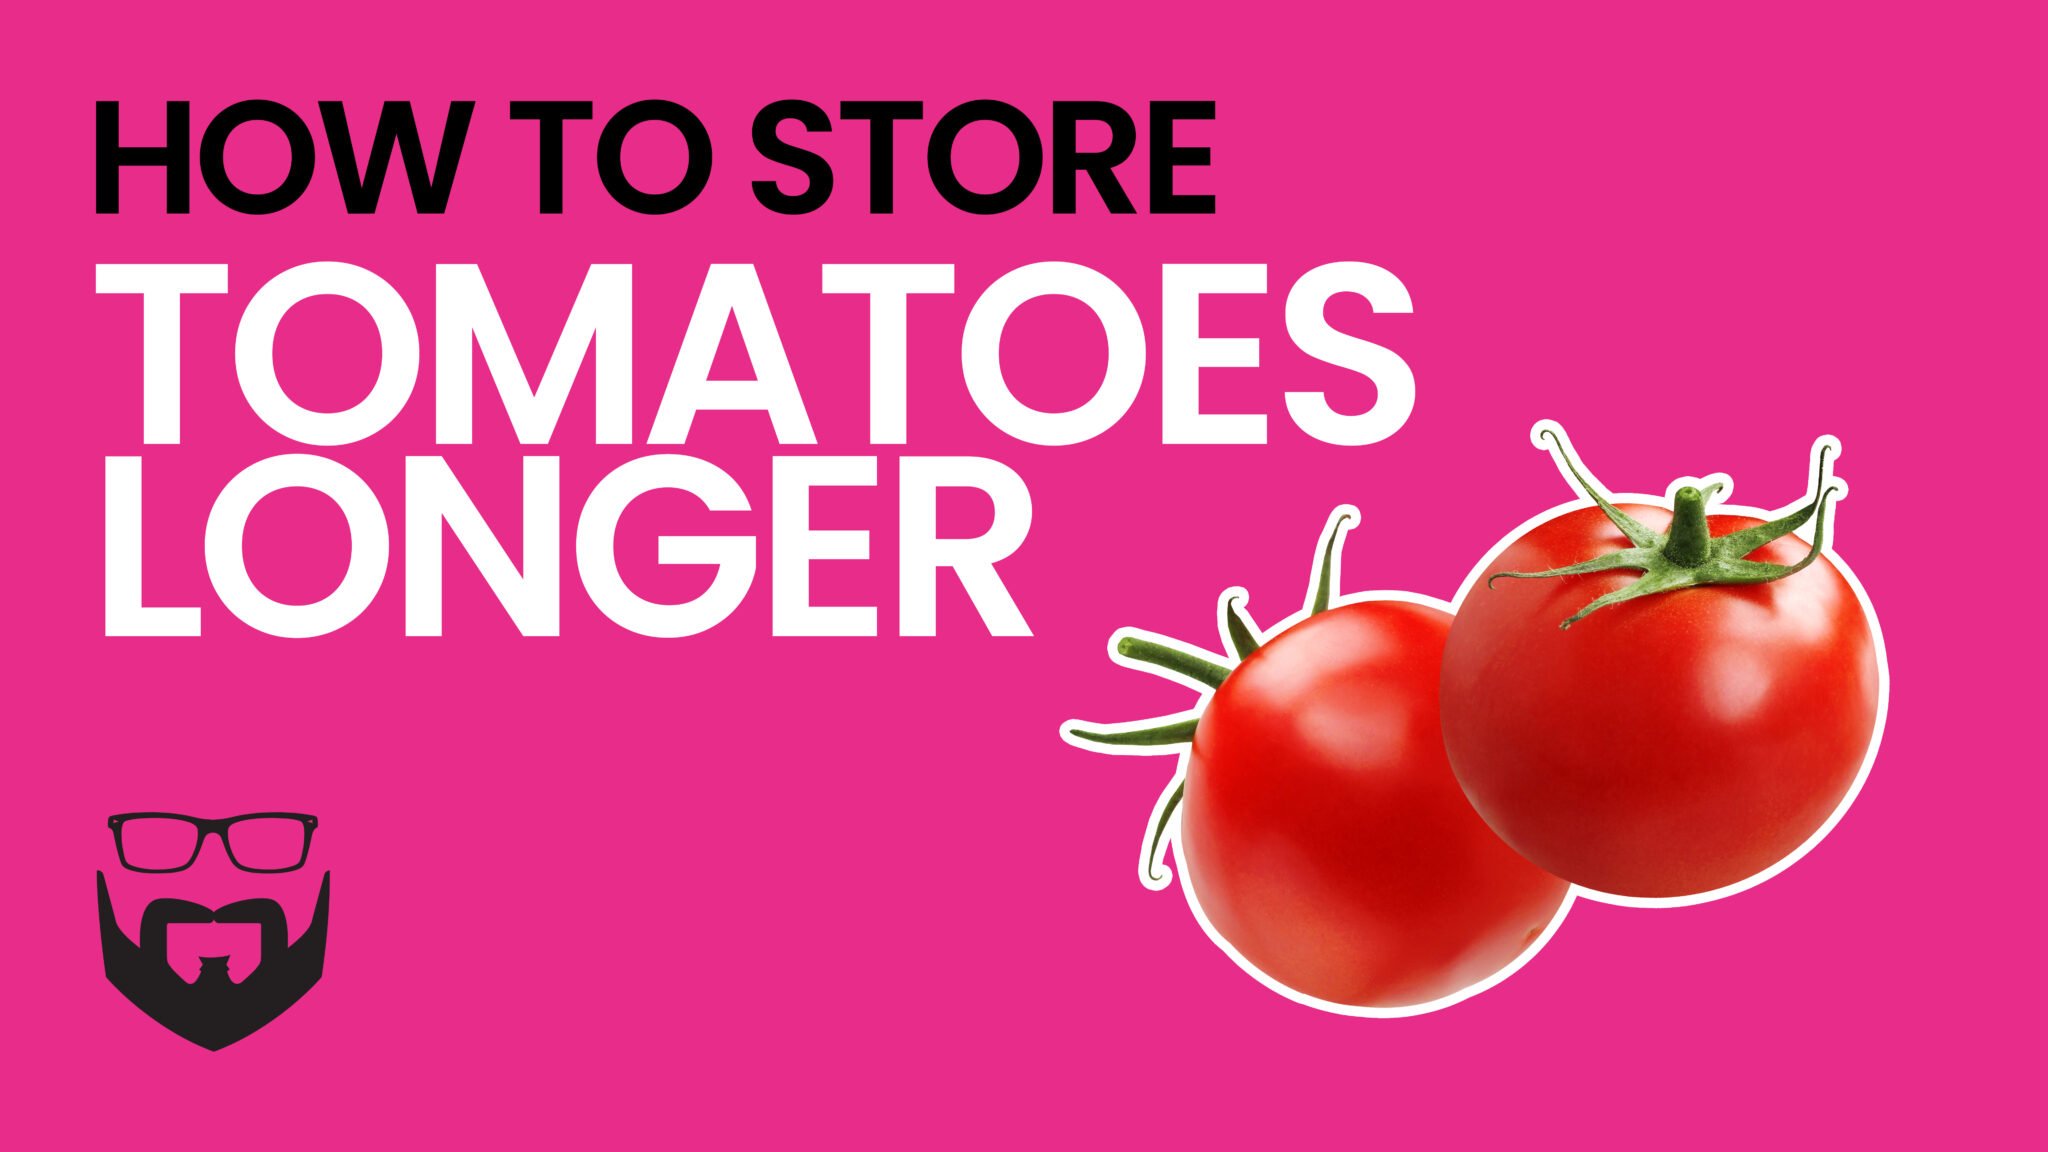 How to Store Tomatoes Longer Video - Pink